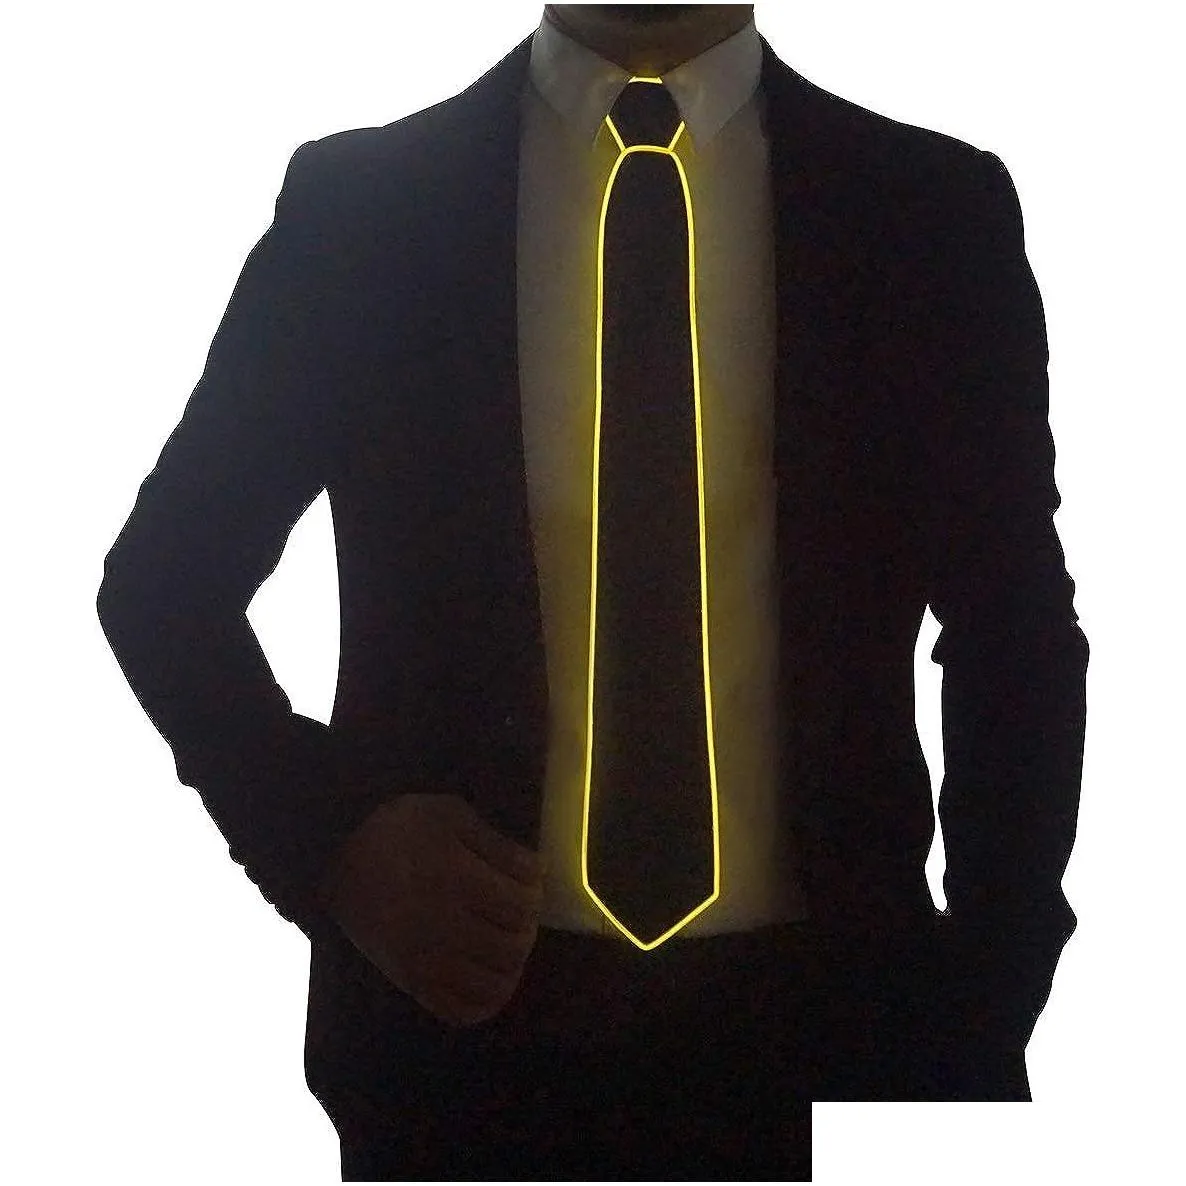 Other Motorcycle Accessories Led Tie Light Up Fanny Ties Novelty Necktie For Men Accessory Drop Delivery Mobiles Motorcycles Ot9Ar